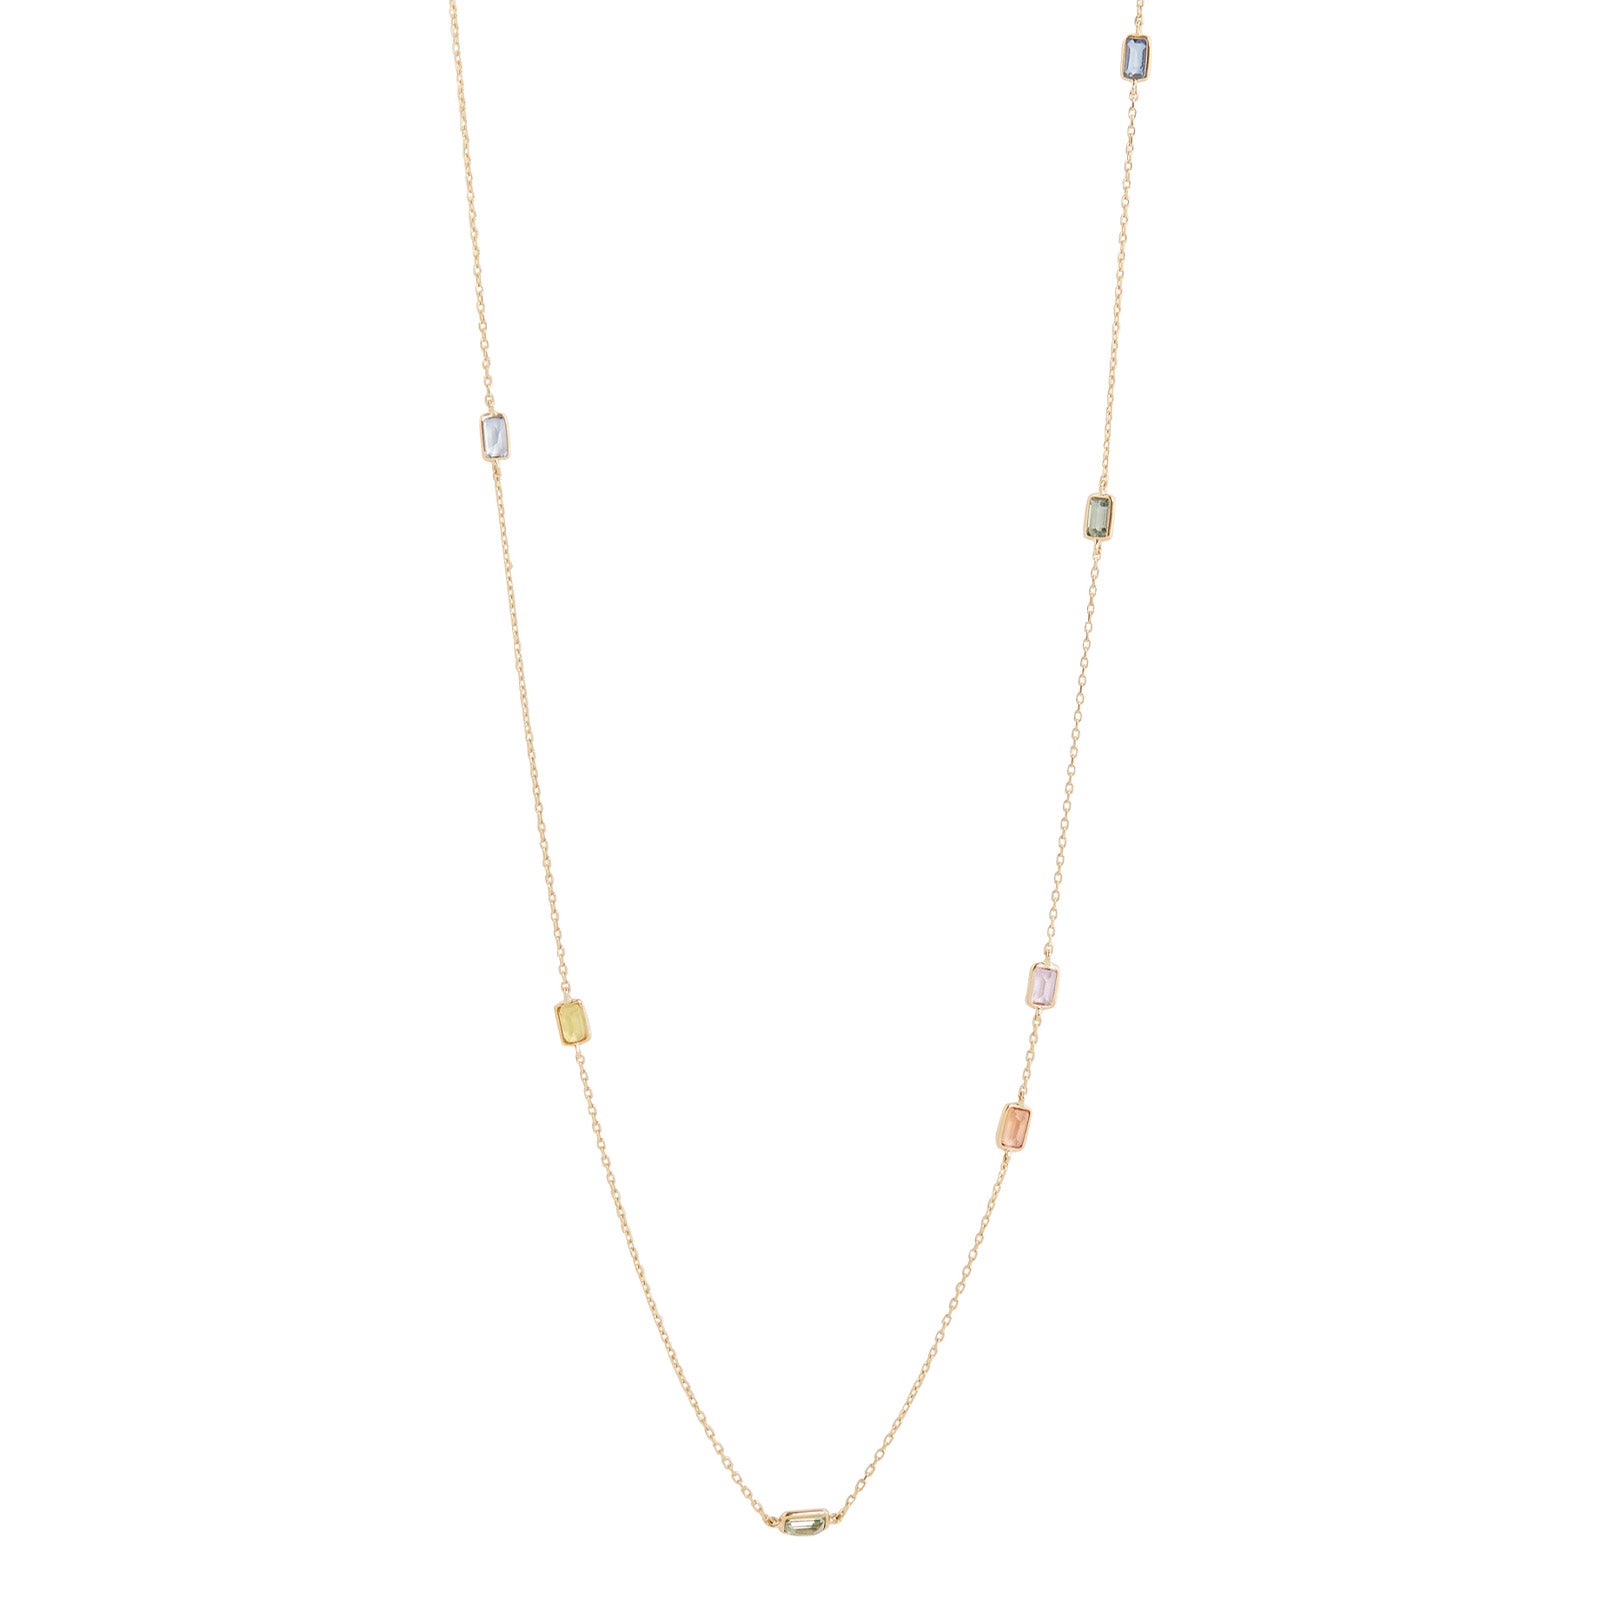 Candy Gemstone Necklace, The Candy Gemstone Collection